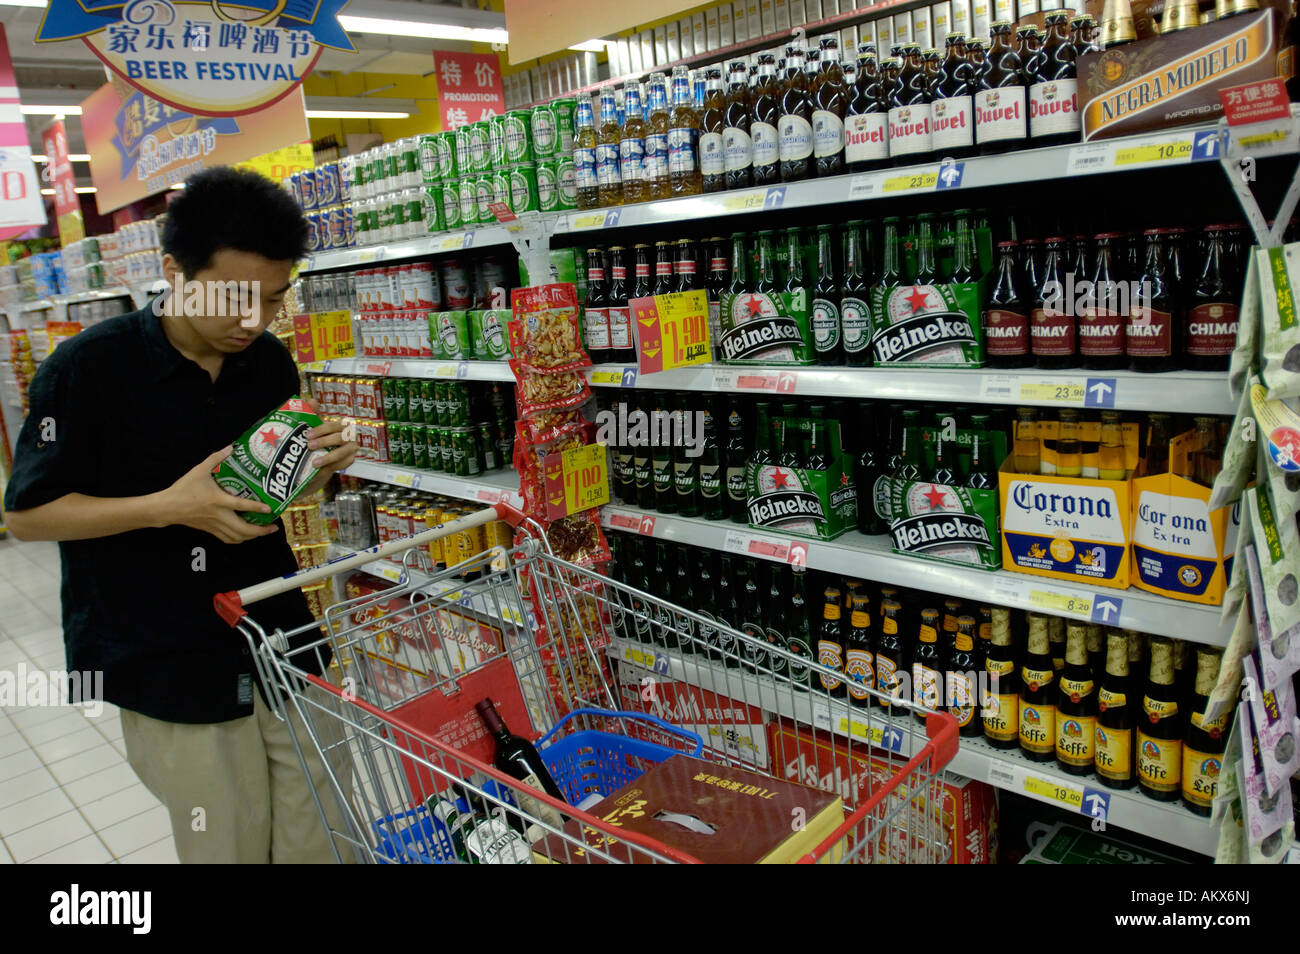 A Carrefour supermarket in Beijing China 23 Jul 2006 Stock Photo